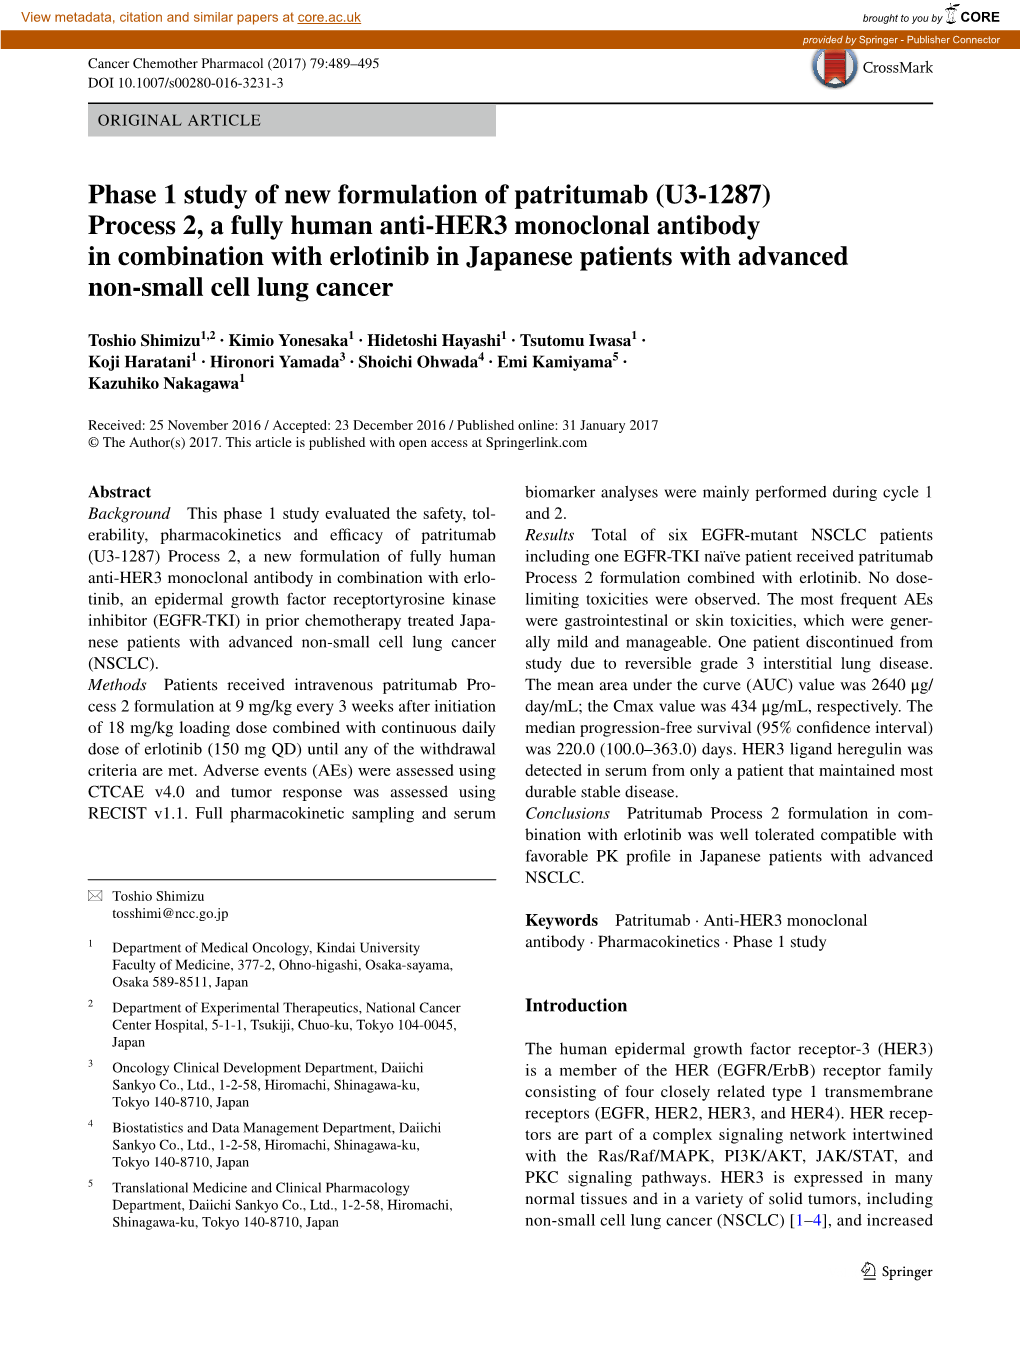 (U3-1287) Process 2, a Fully Human Anti-HER3 Monoclonal Antibody in Combination with Erlotinib in Japanese Patients with Advanced Non-Small Cell Lung Cancer